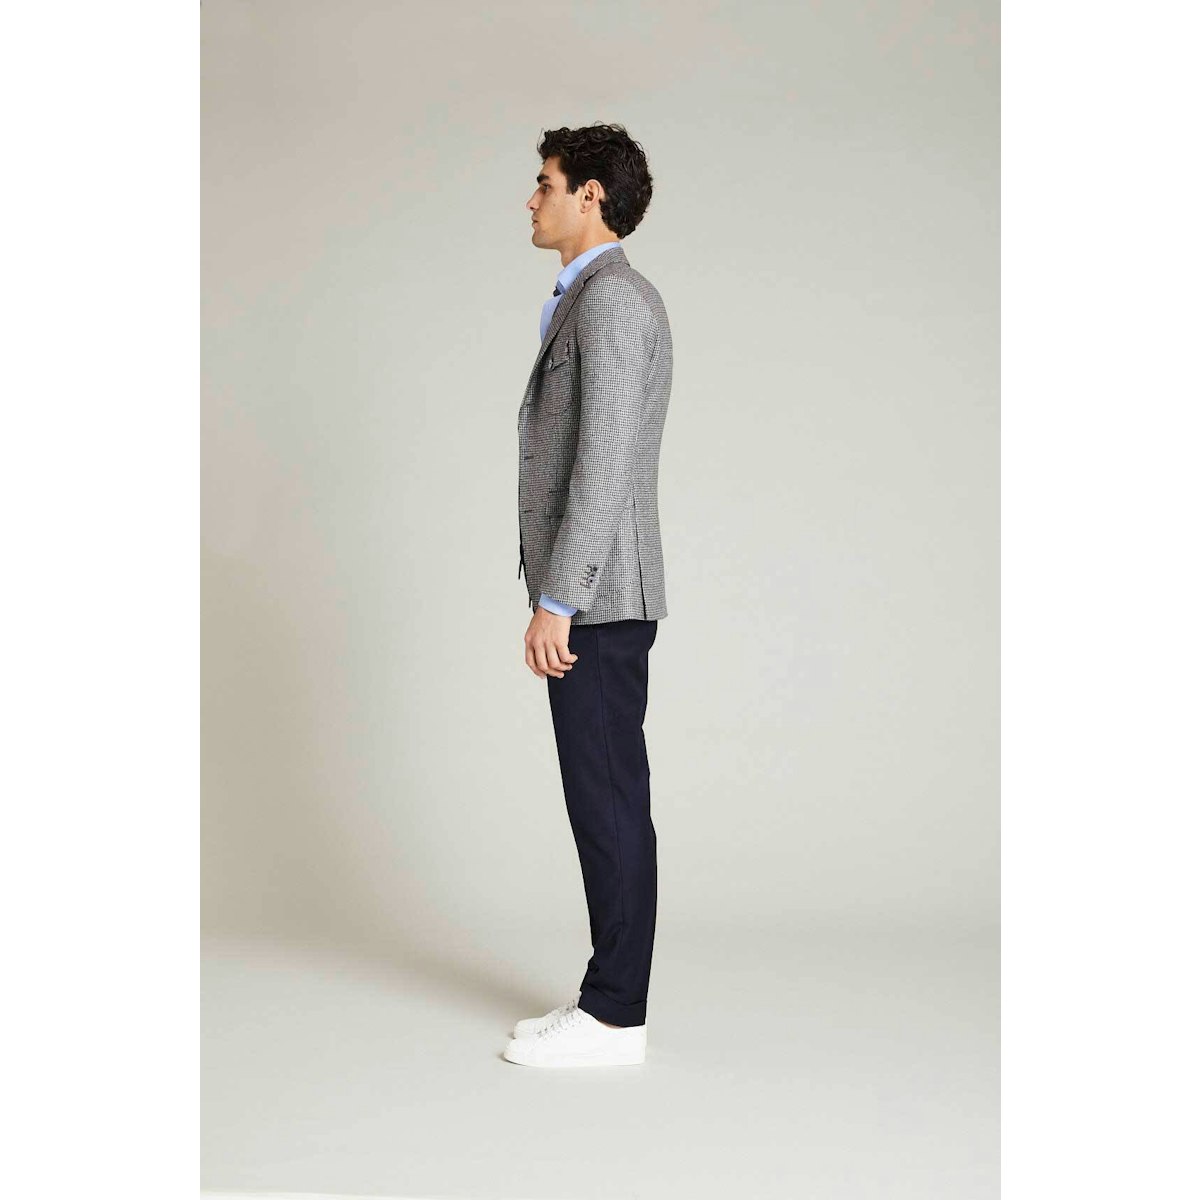 InStitchu Collection The Cavendish Grey Houndstooth Jacket 